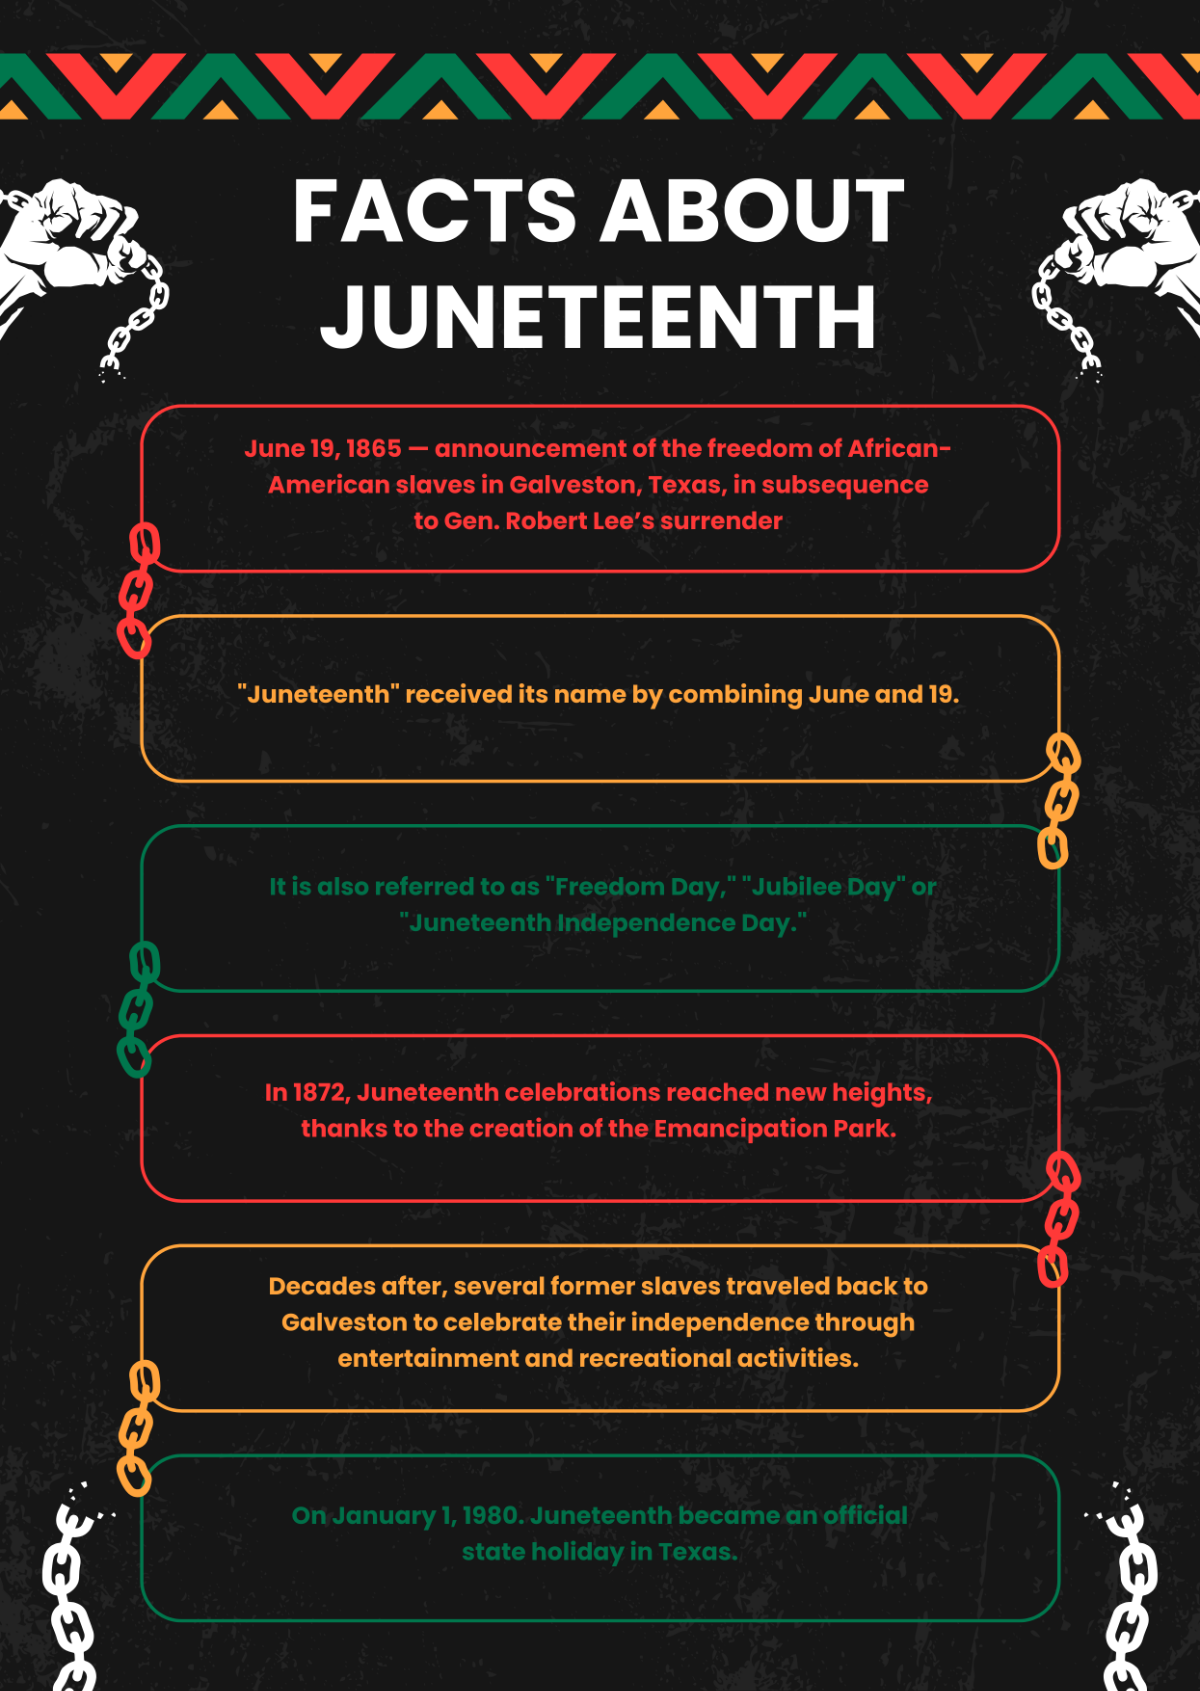 Facts about Juneteenth